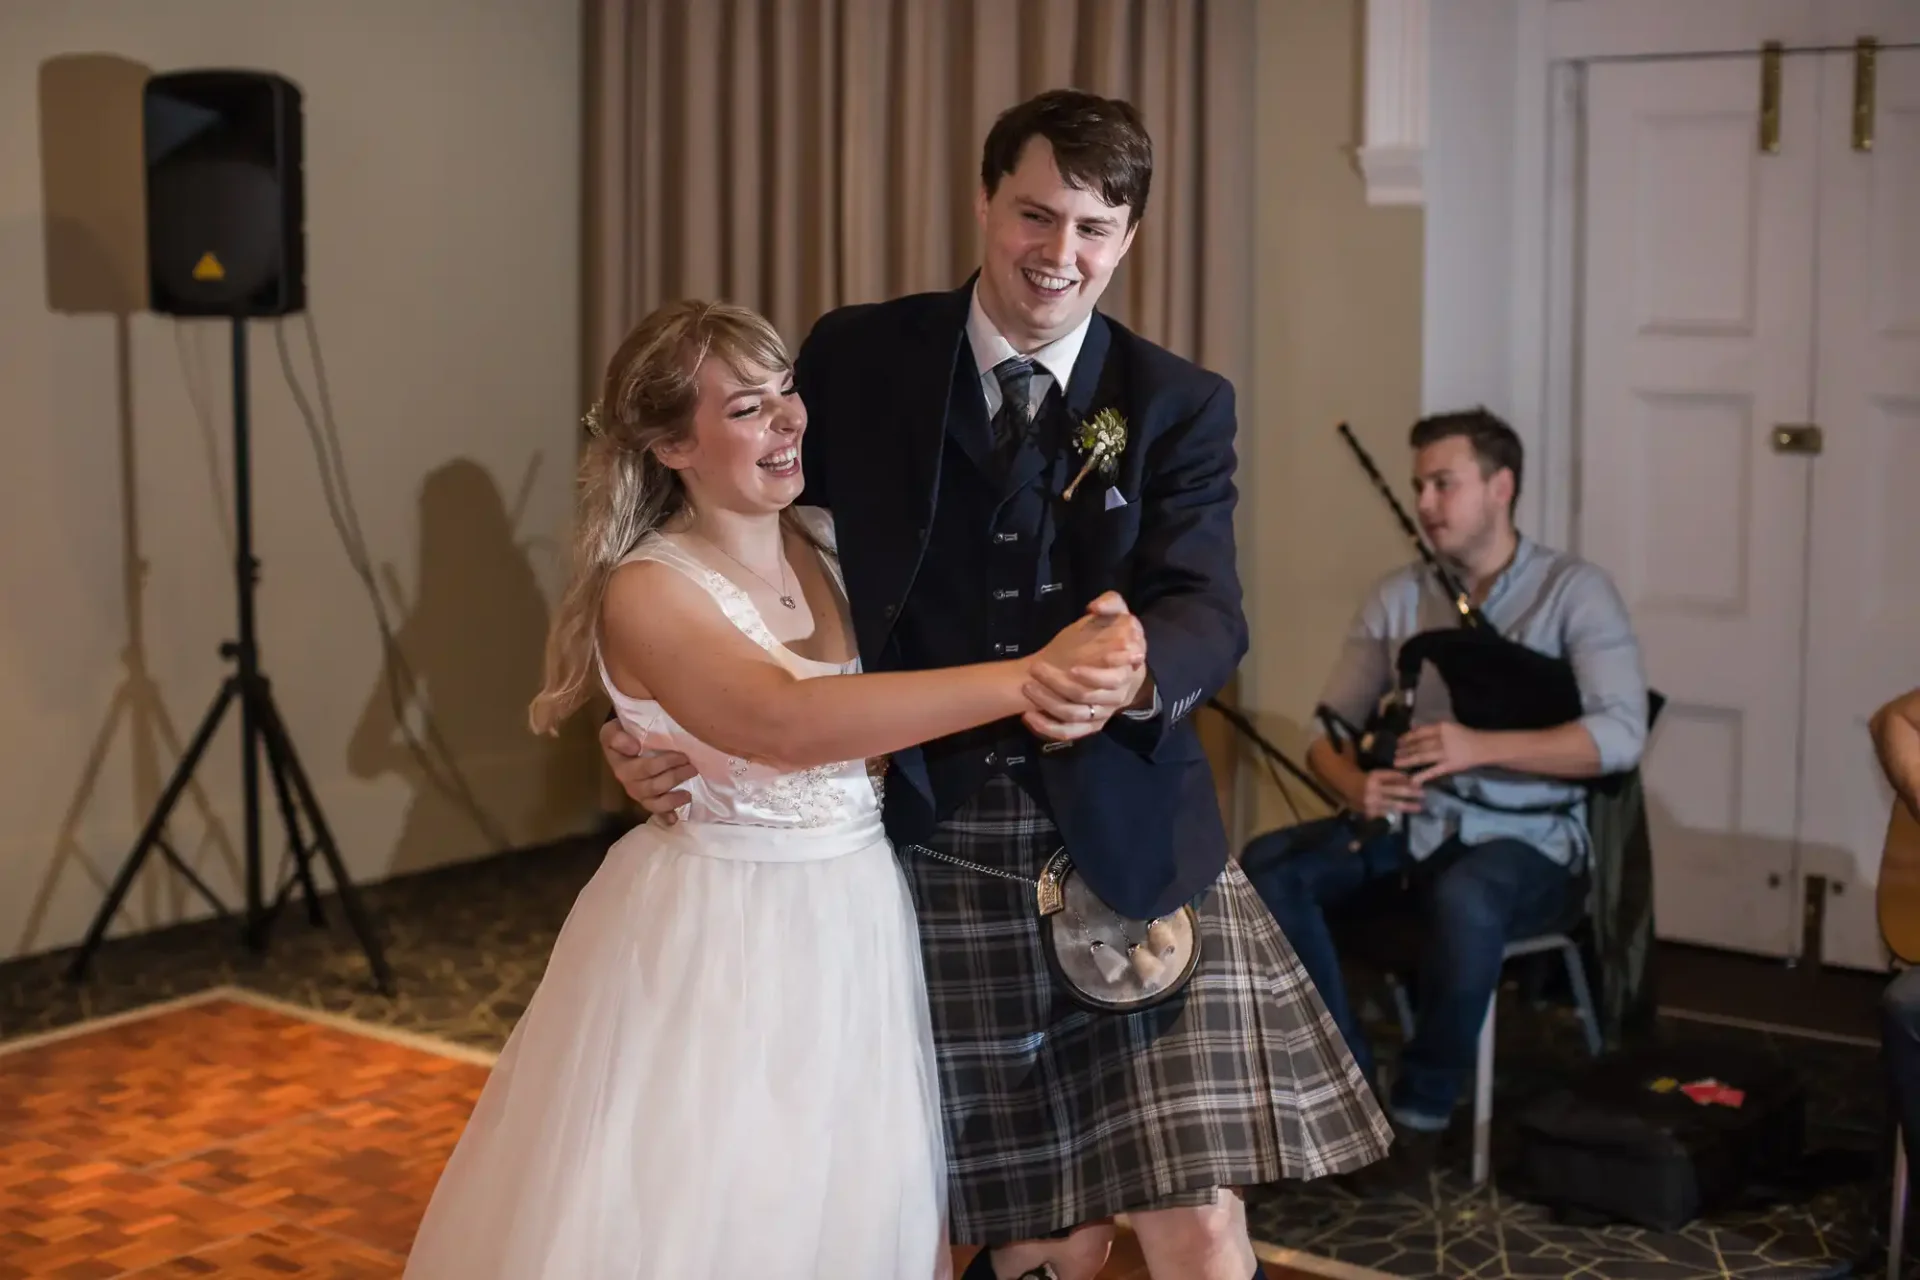 A joyful bride and groom holding hands and dancing at their wedding reception, with a live band playing in the background. the groom is wearing a kilt.